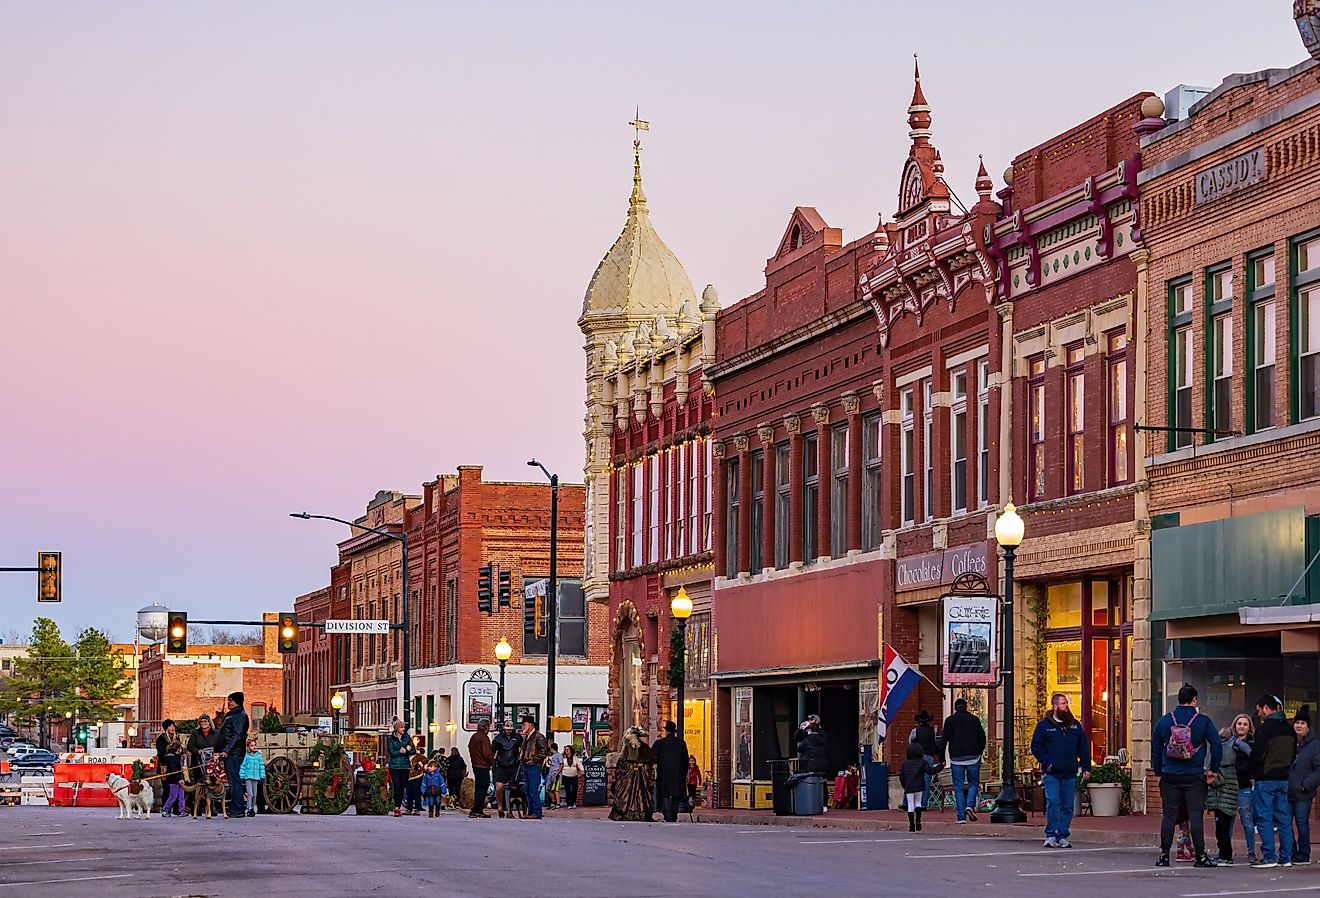 Night view of historical buildings in Guthrie, Oklahoma. Image credit Kit Leong via Shutterstock